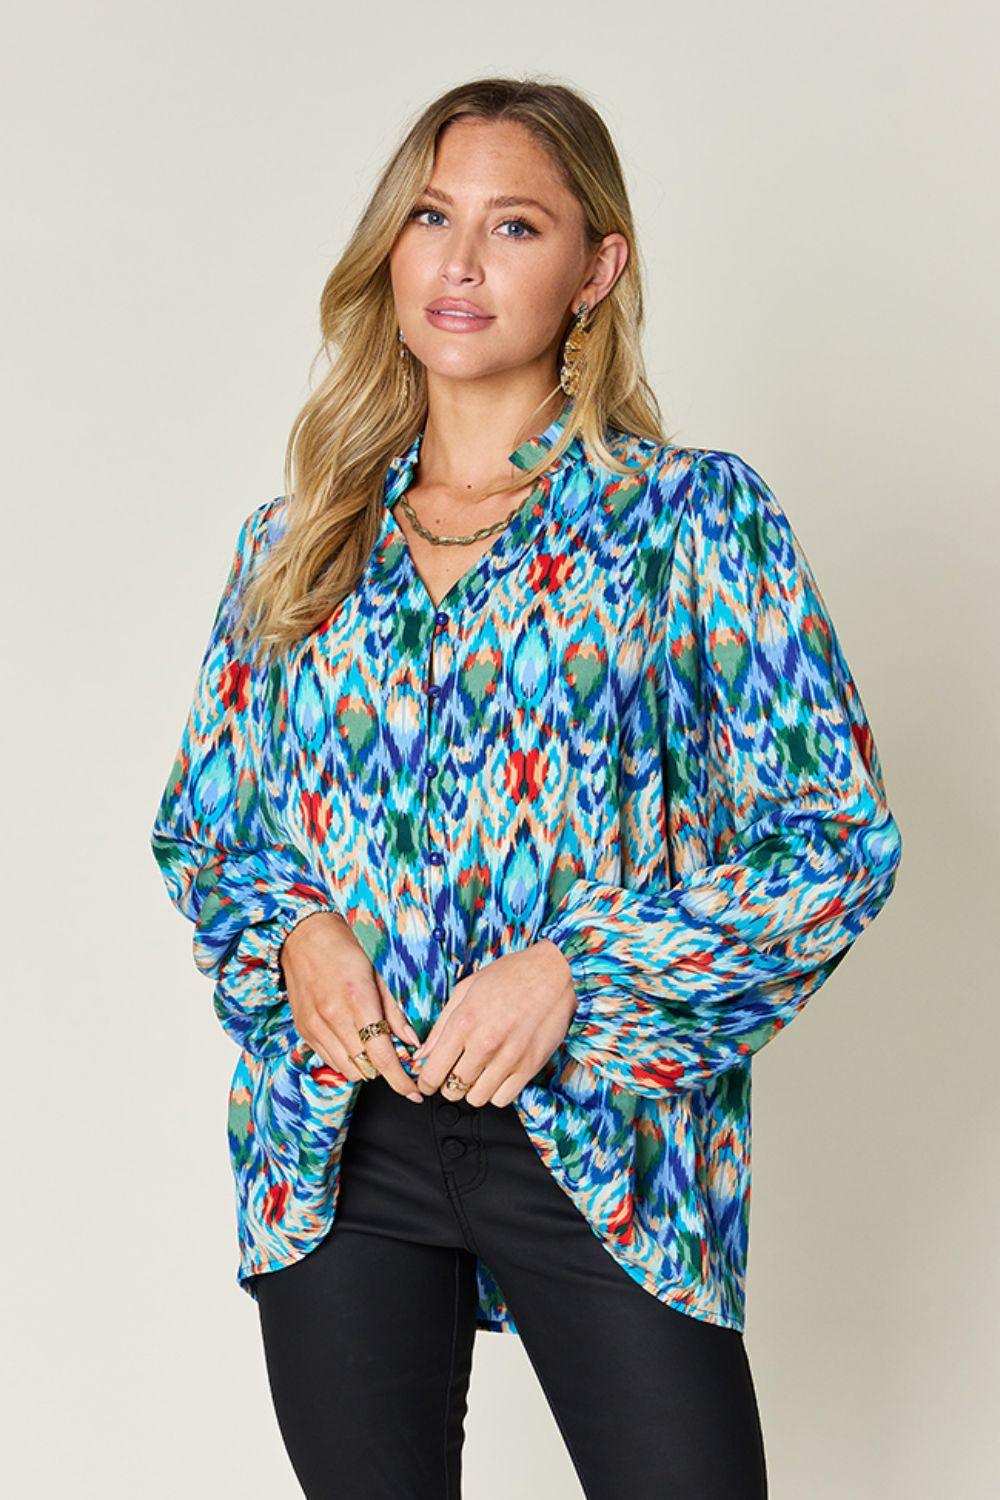 Double Take Full Size Printed Balloon Sleeve Blouse Sky Blue Shirts & Tops